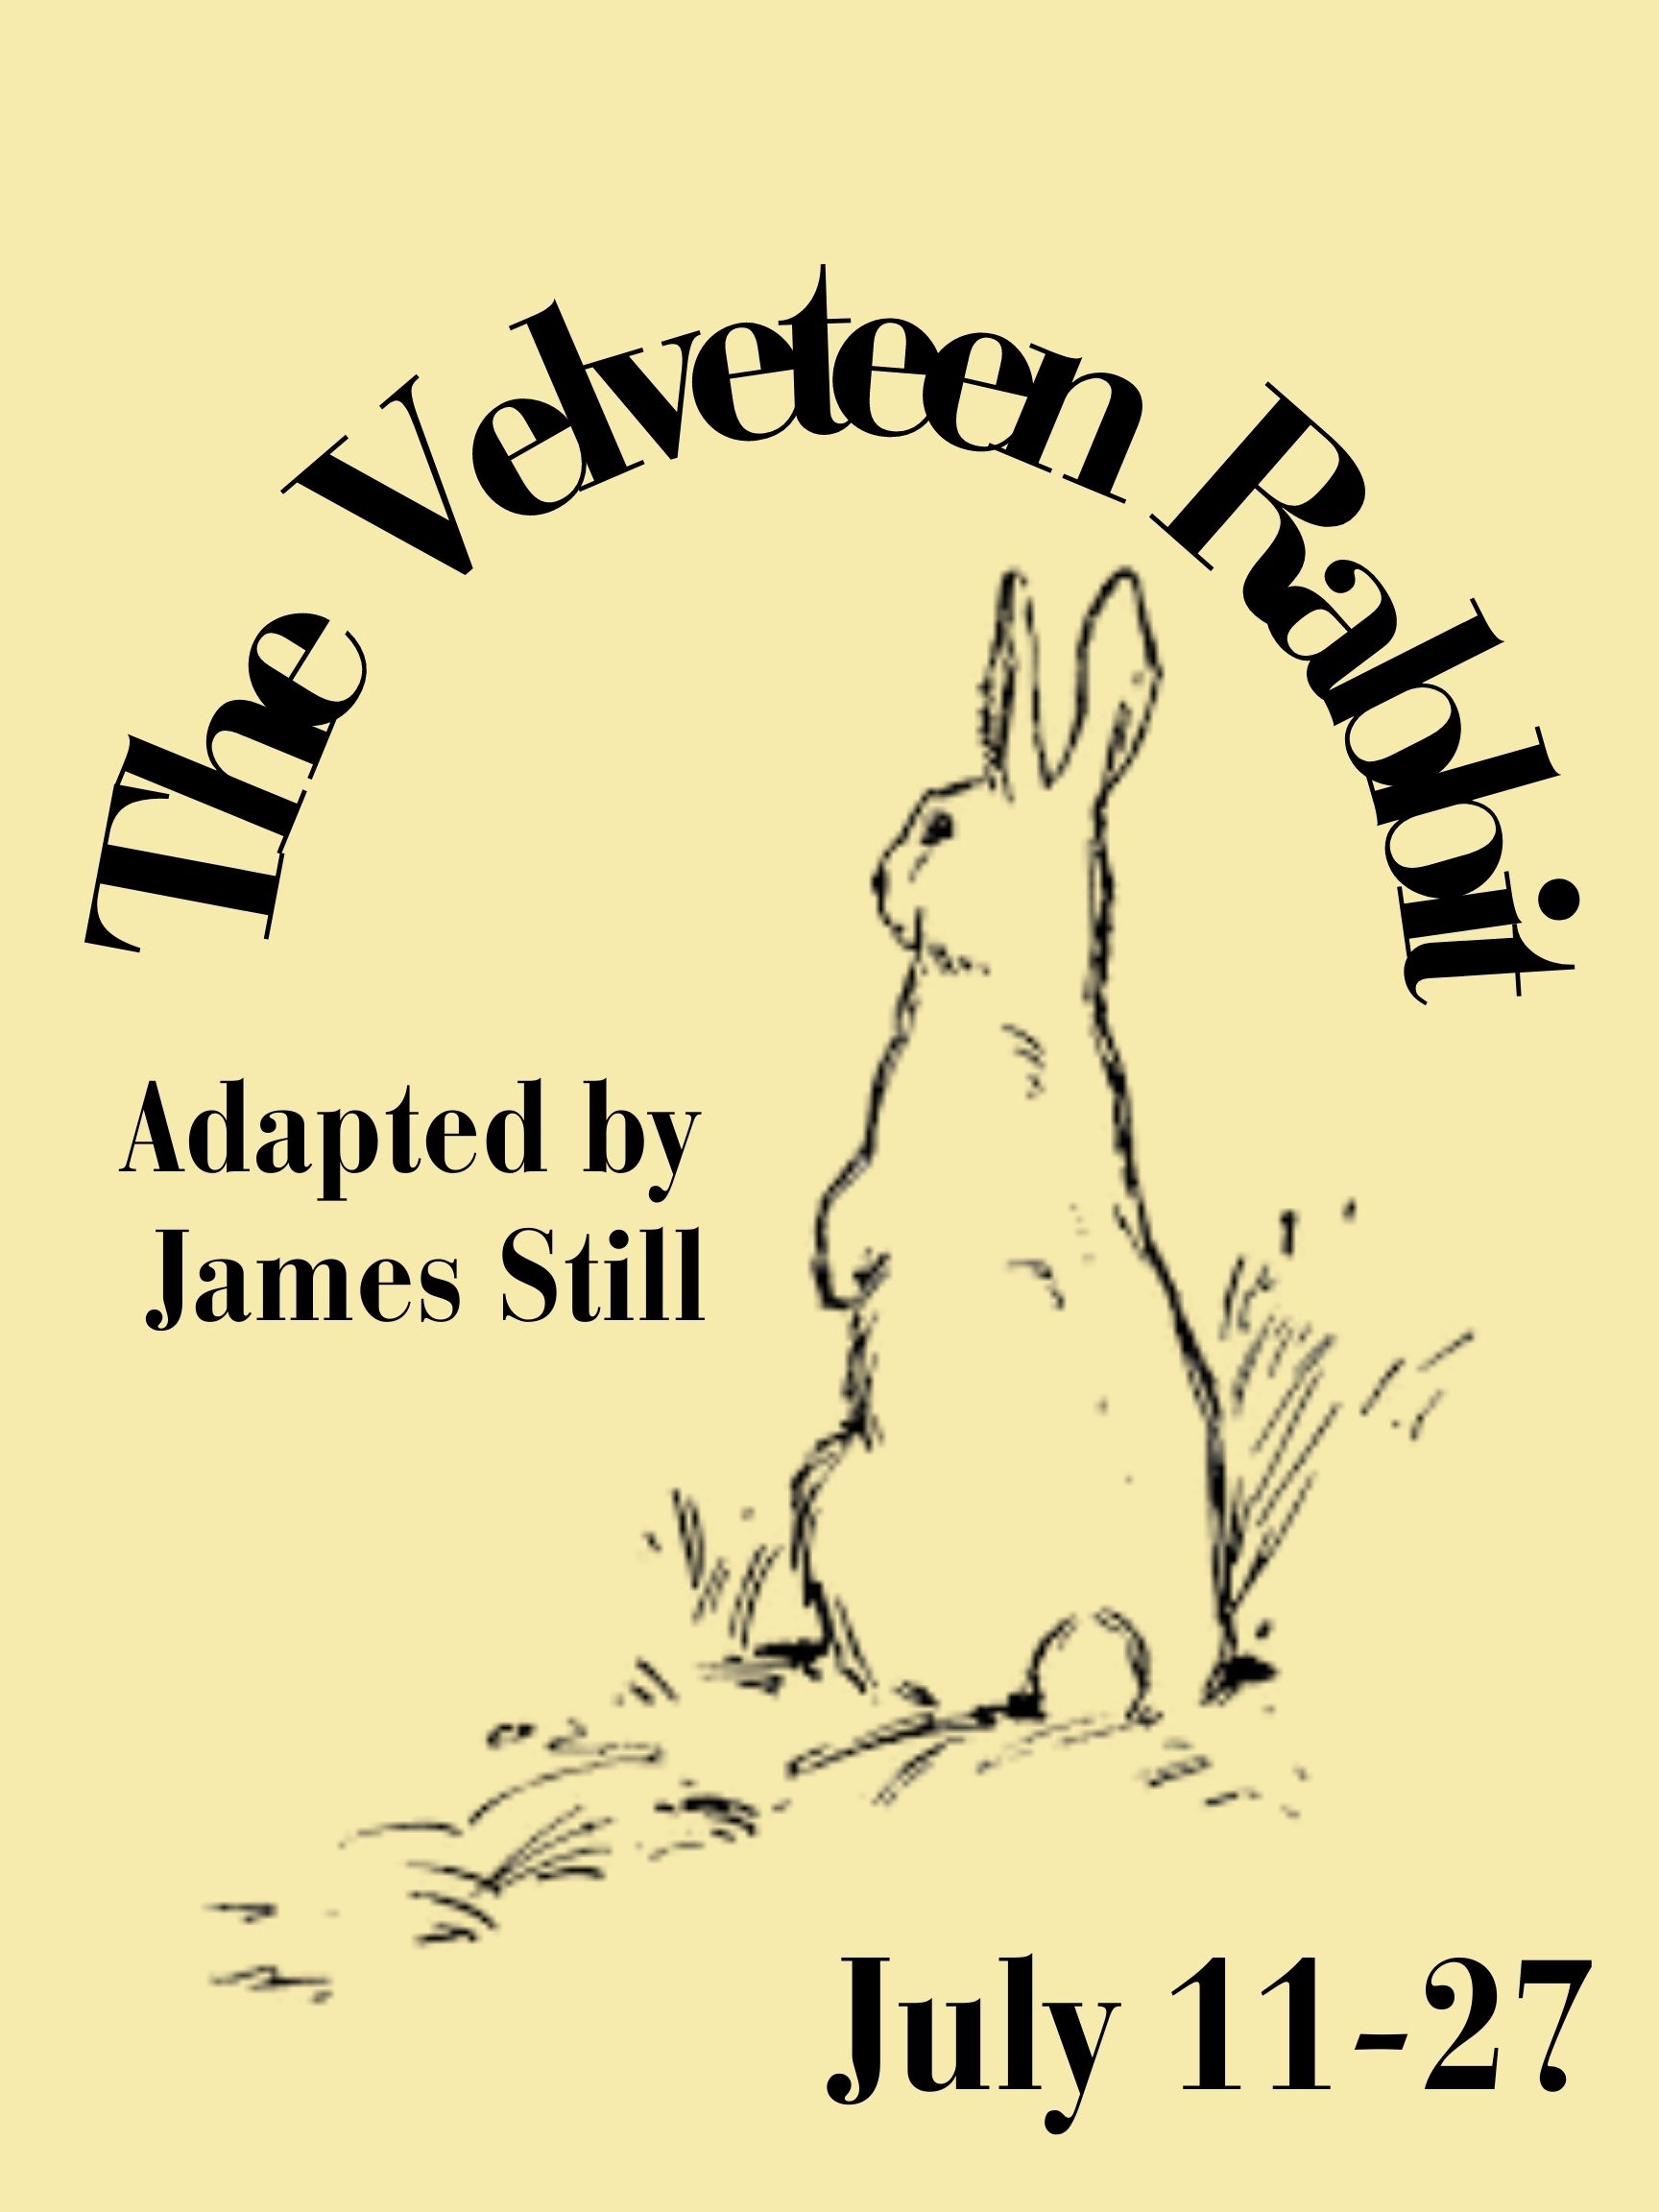 The Velveteen Rabbit by Hill Country Arts Foundation (HCAF)